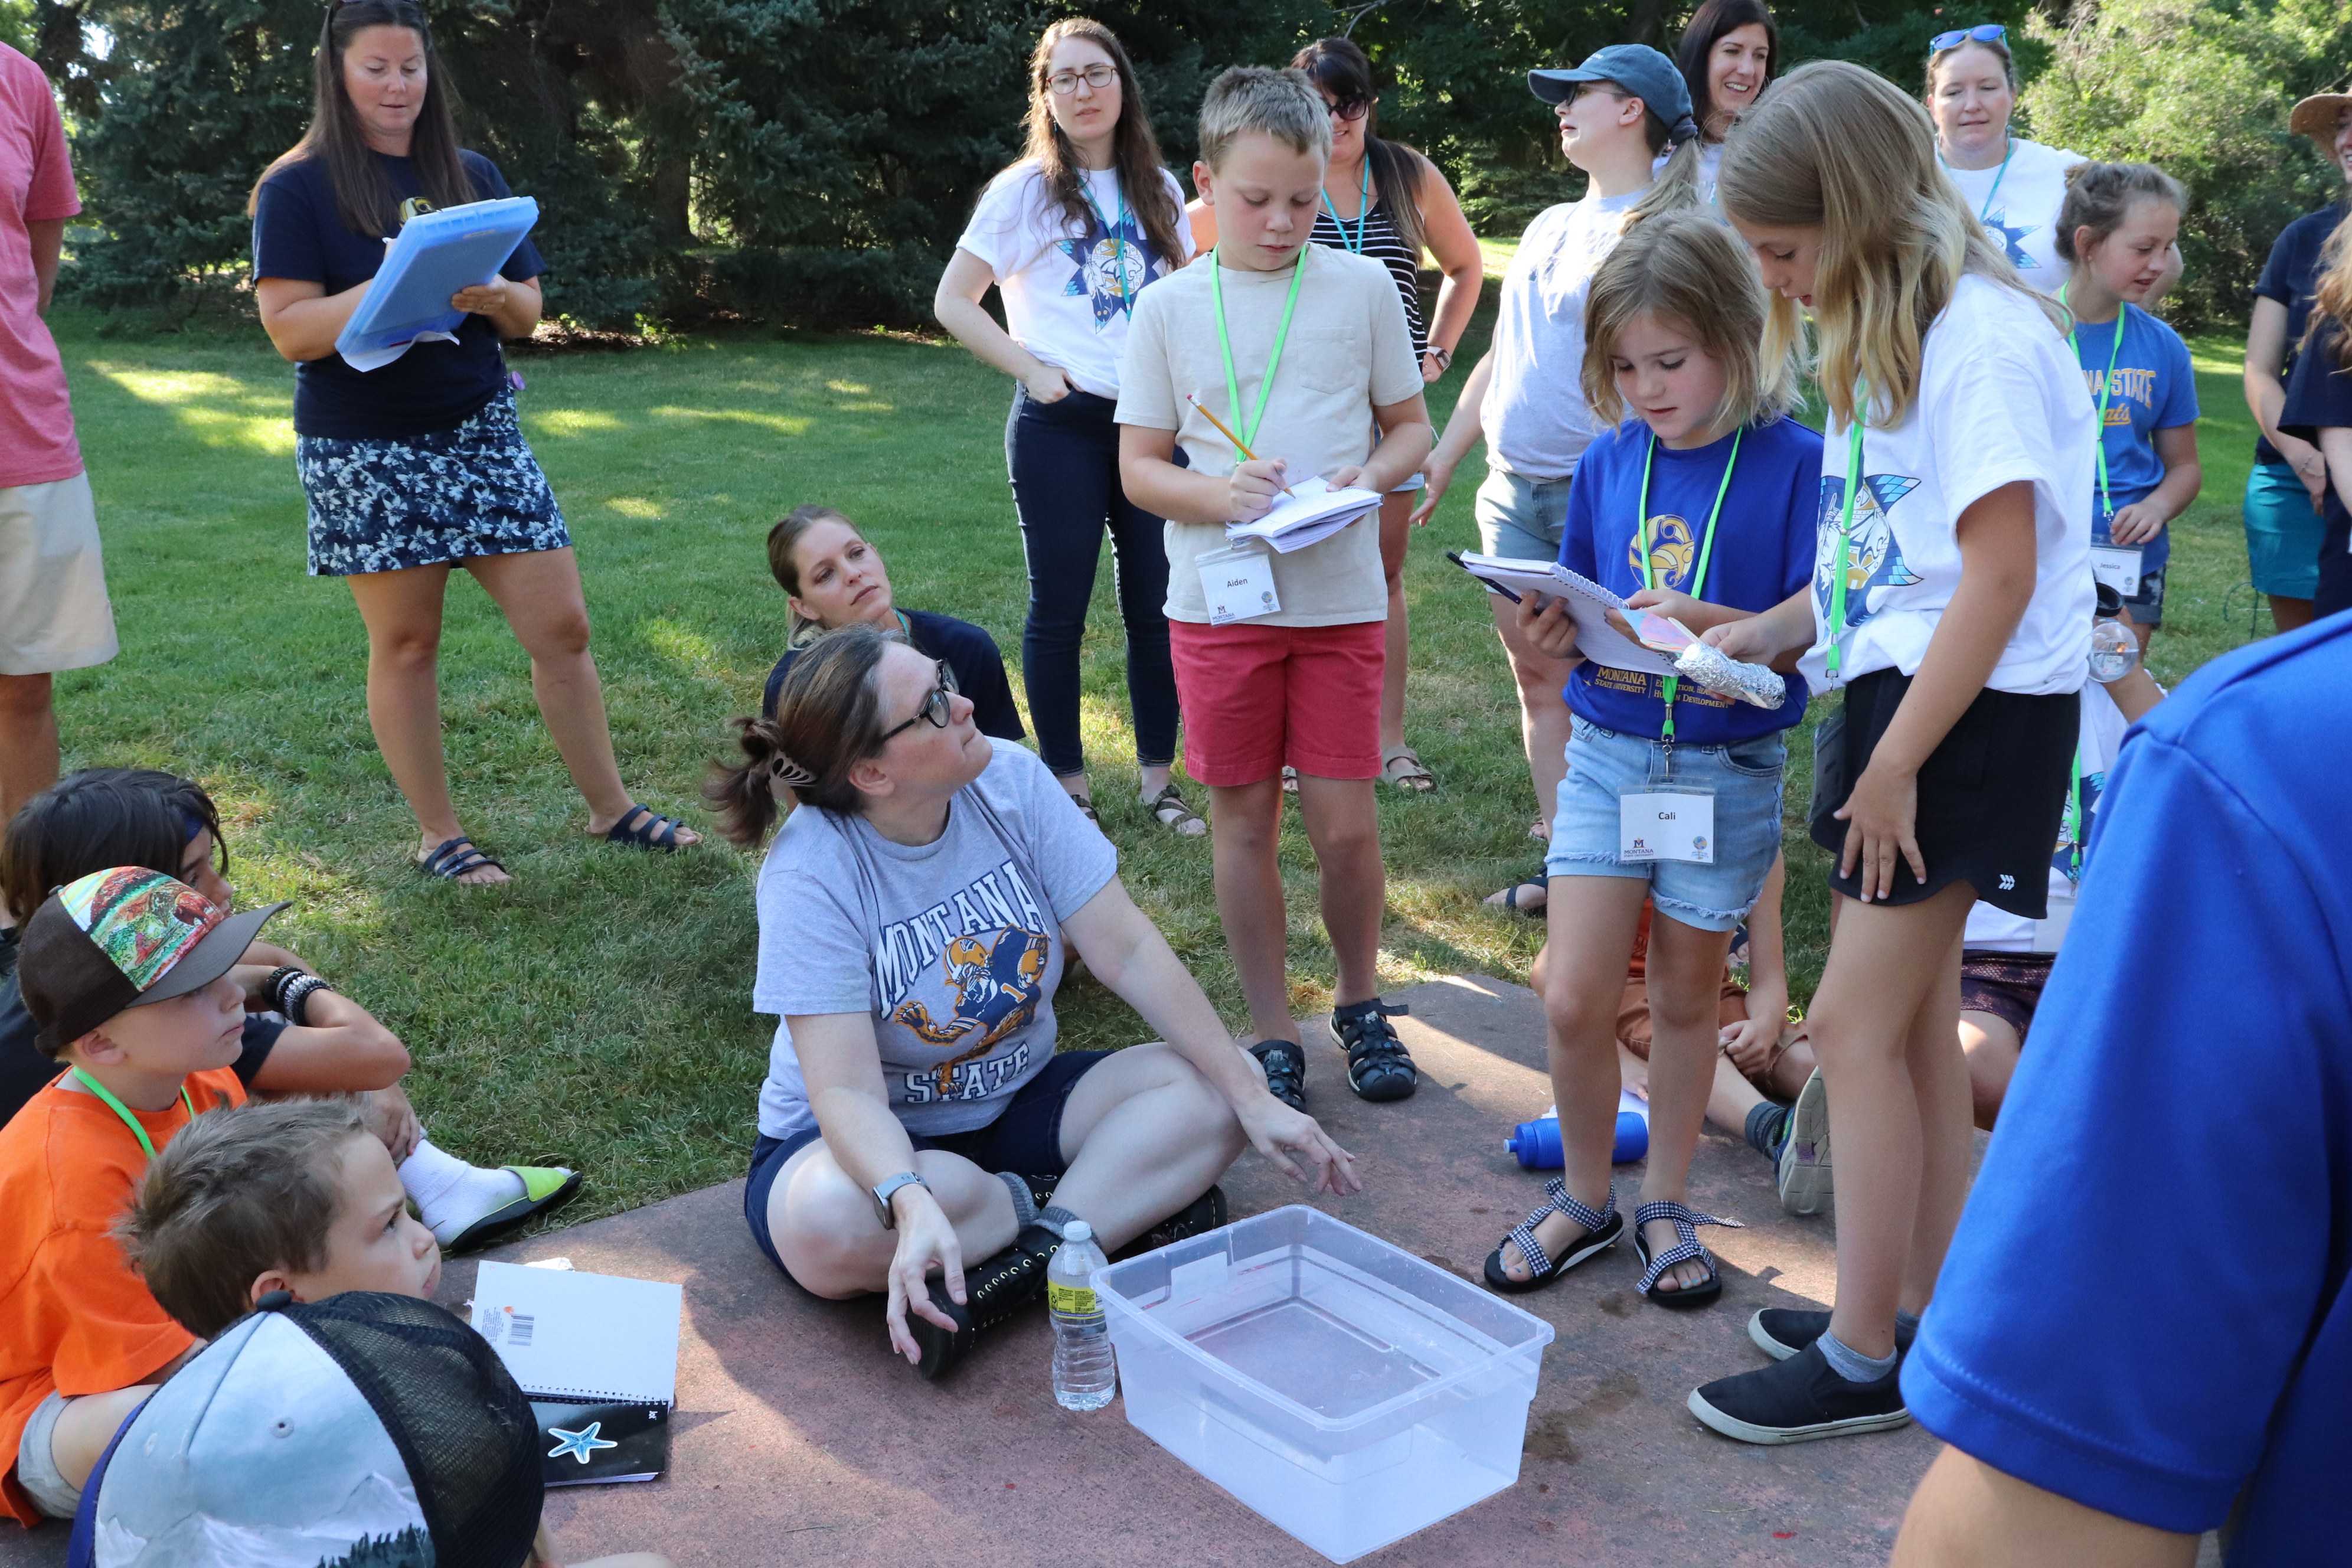 ICC campers participate in a water-based activity